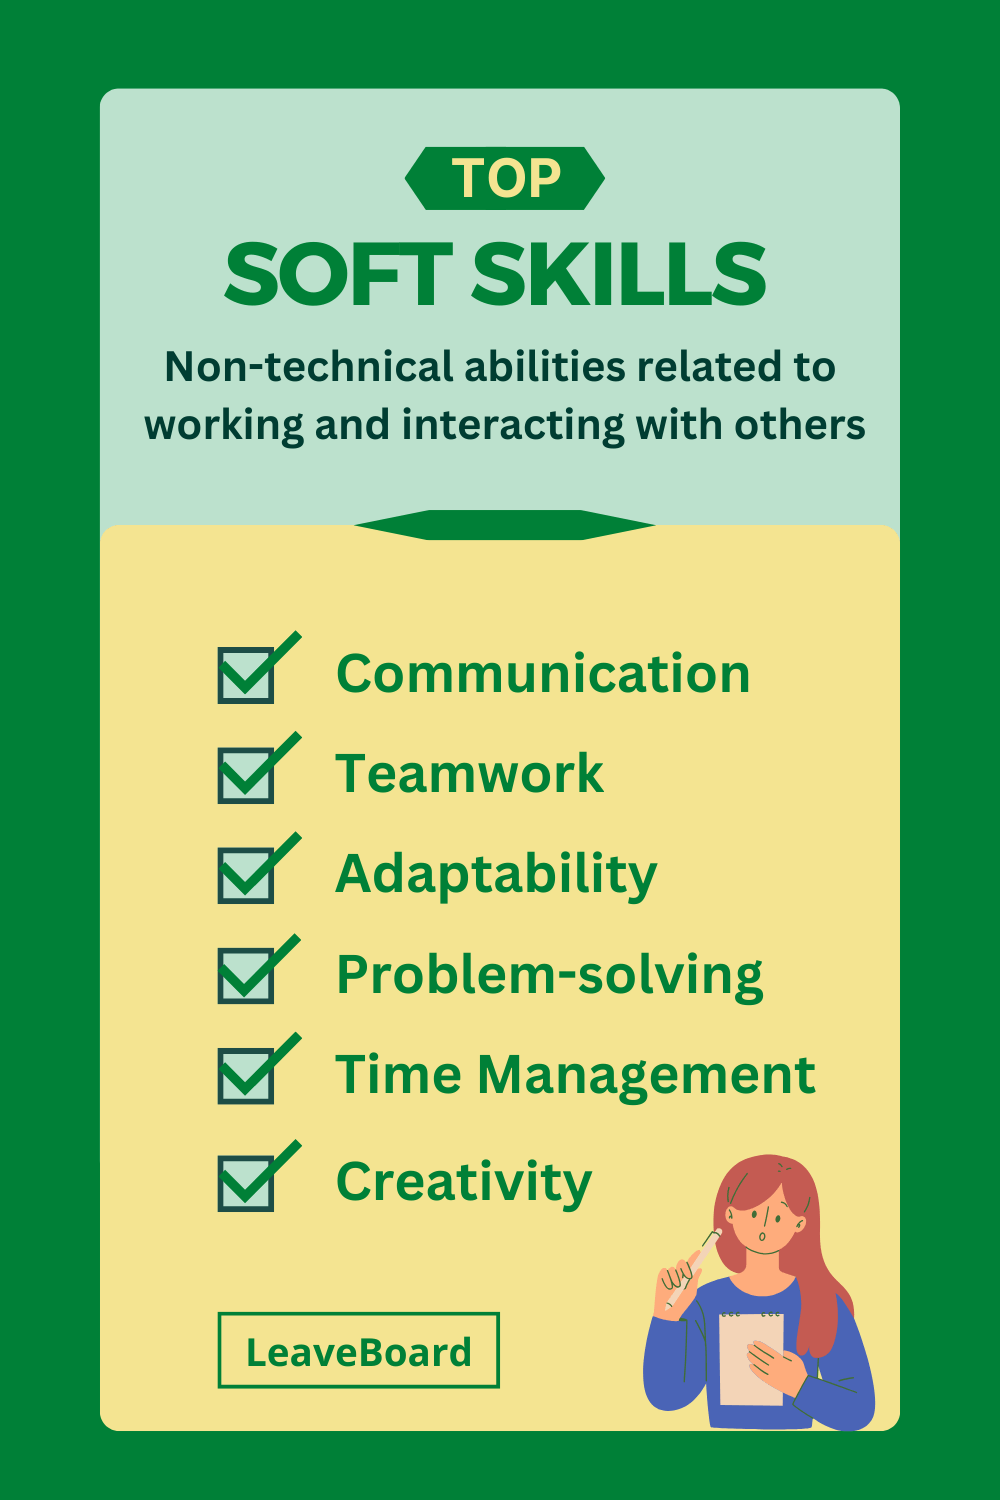 5 Soft Skills to Improve Your Career - Ramsey